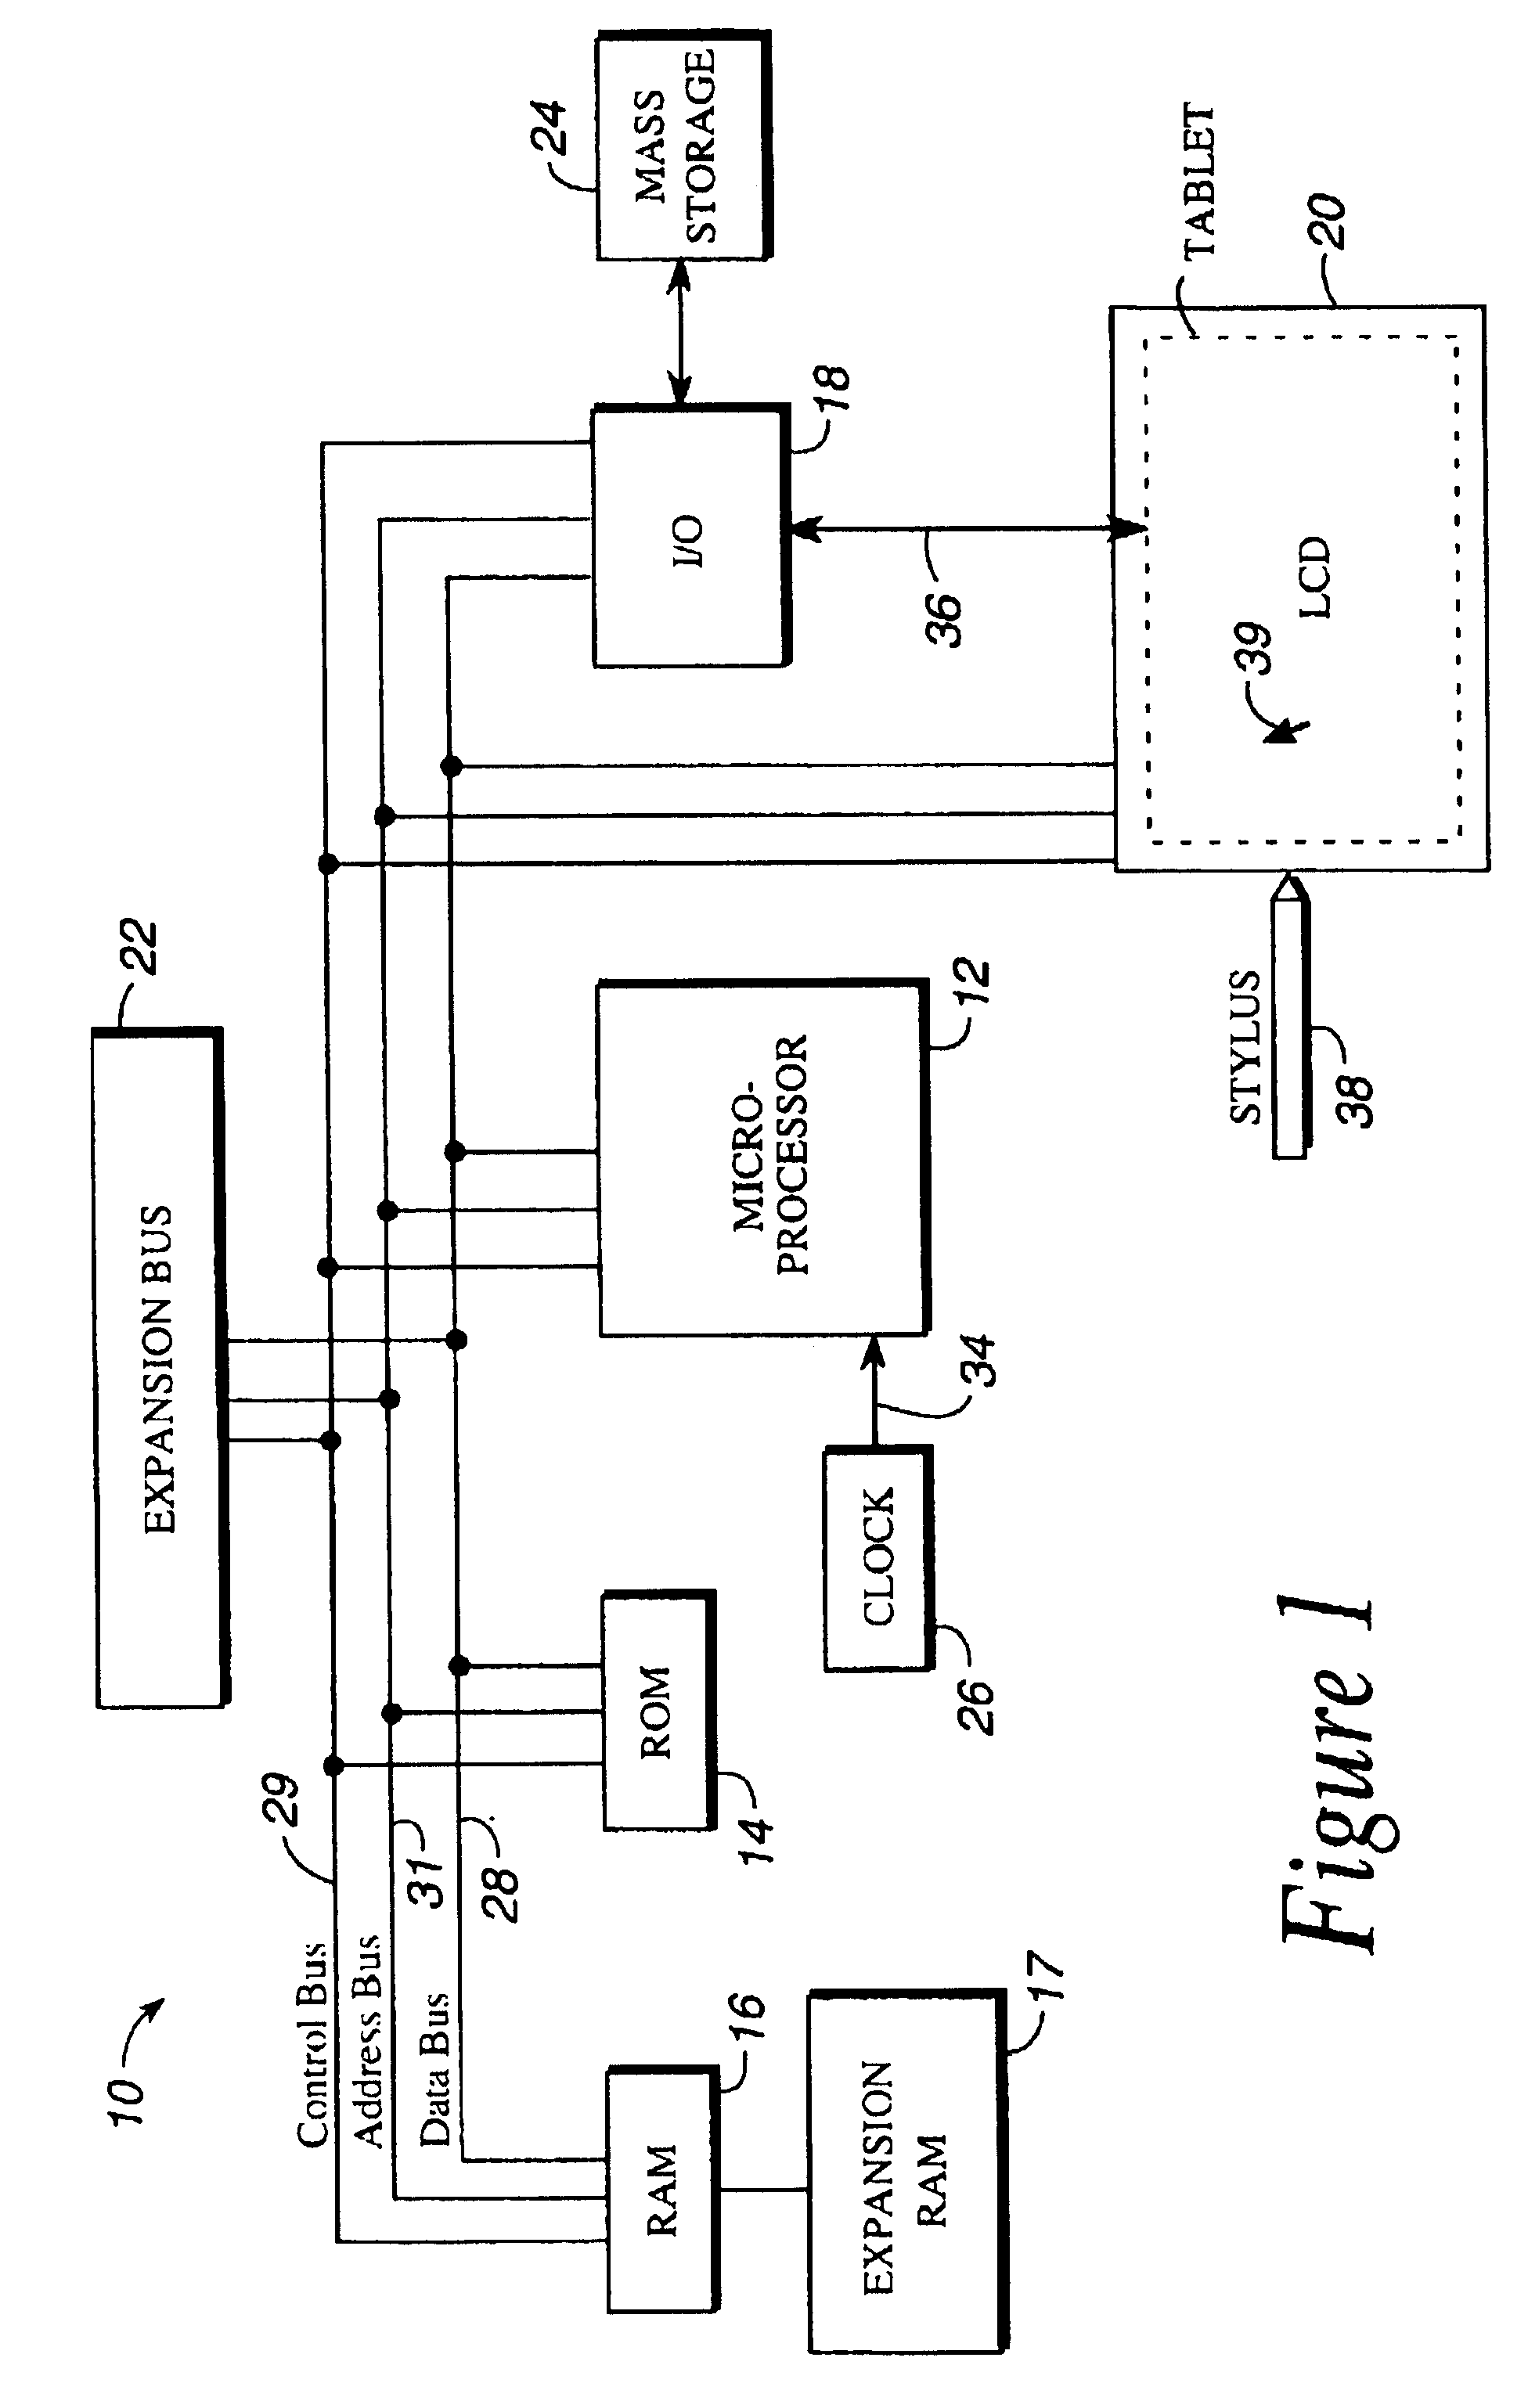 Method and apparatus for providing translucent images on a computer display